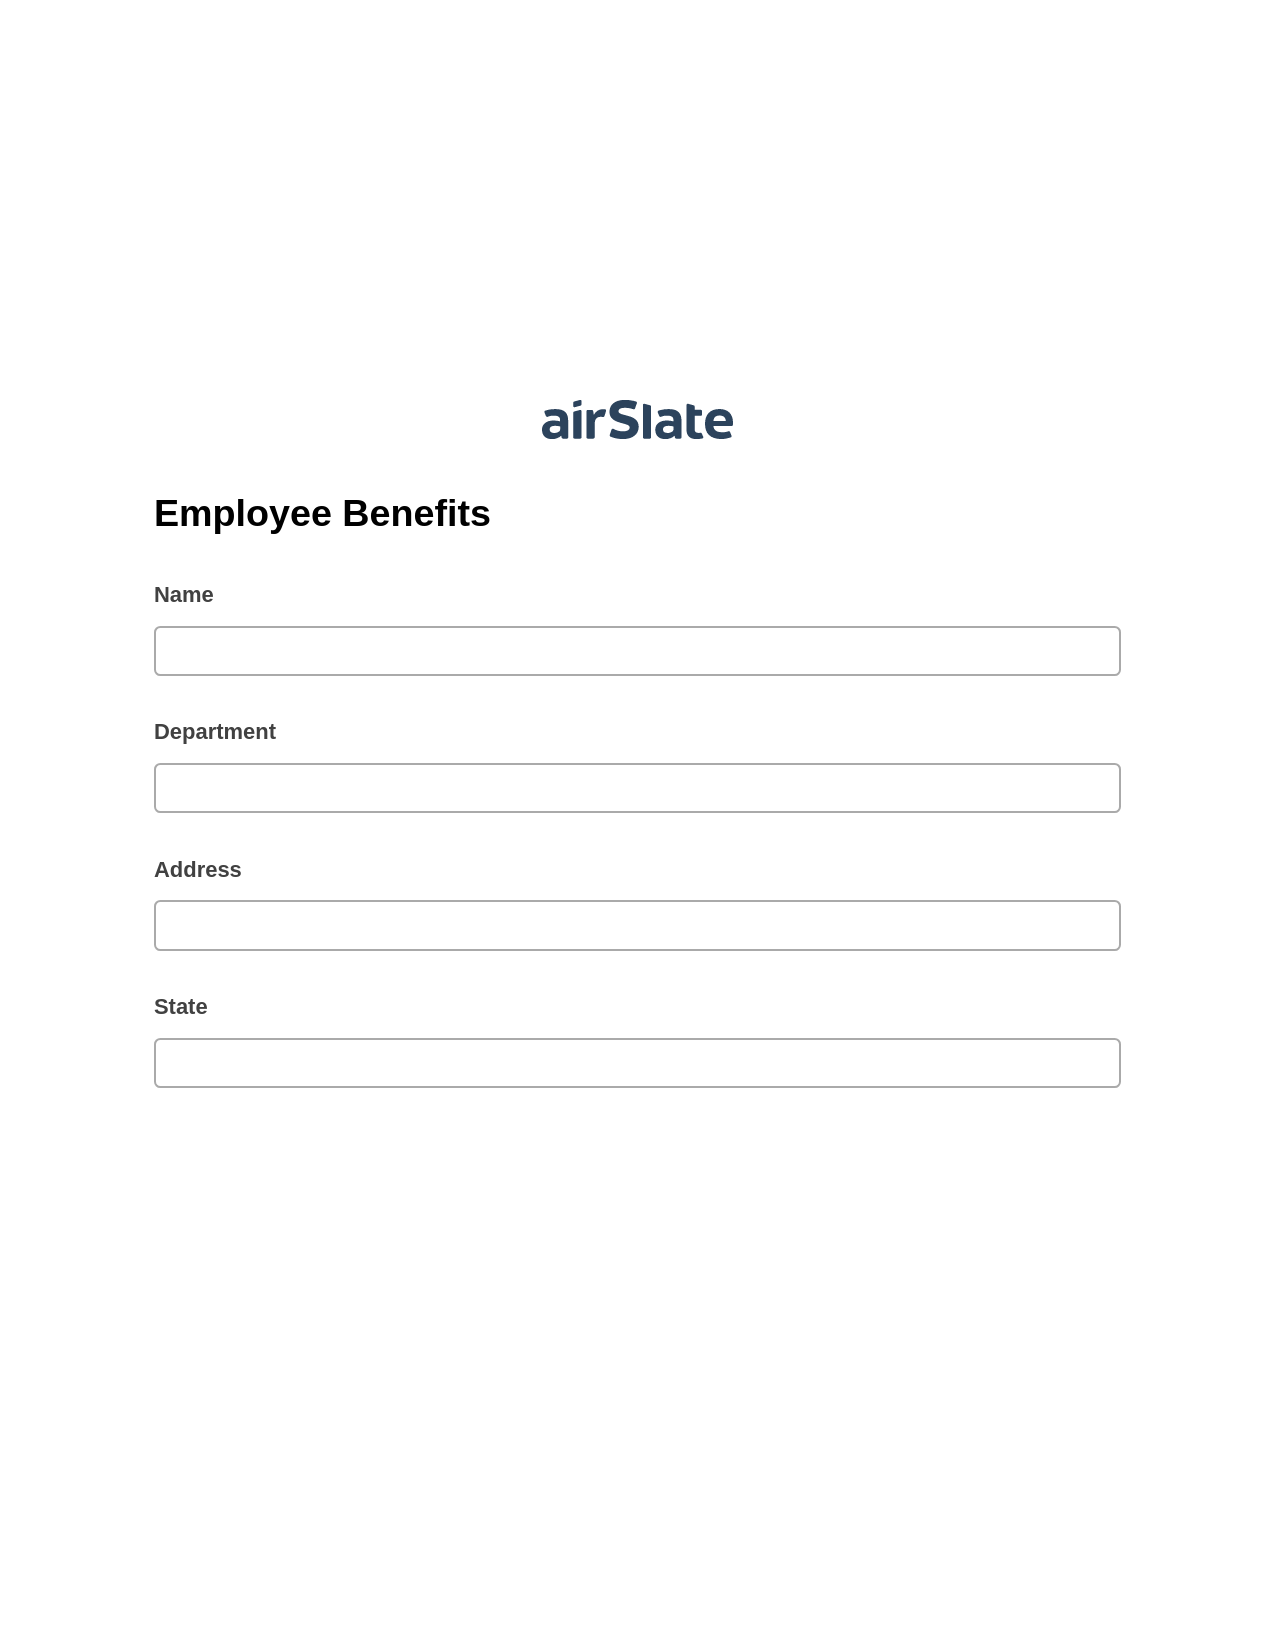 Multirole Employee Benefits Pre-fill from CSV File Bot, Audit Trail Bot, Export to Excel 365 Bot